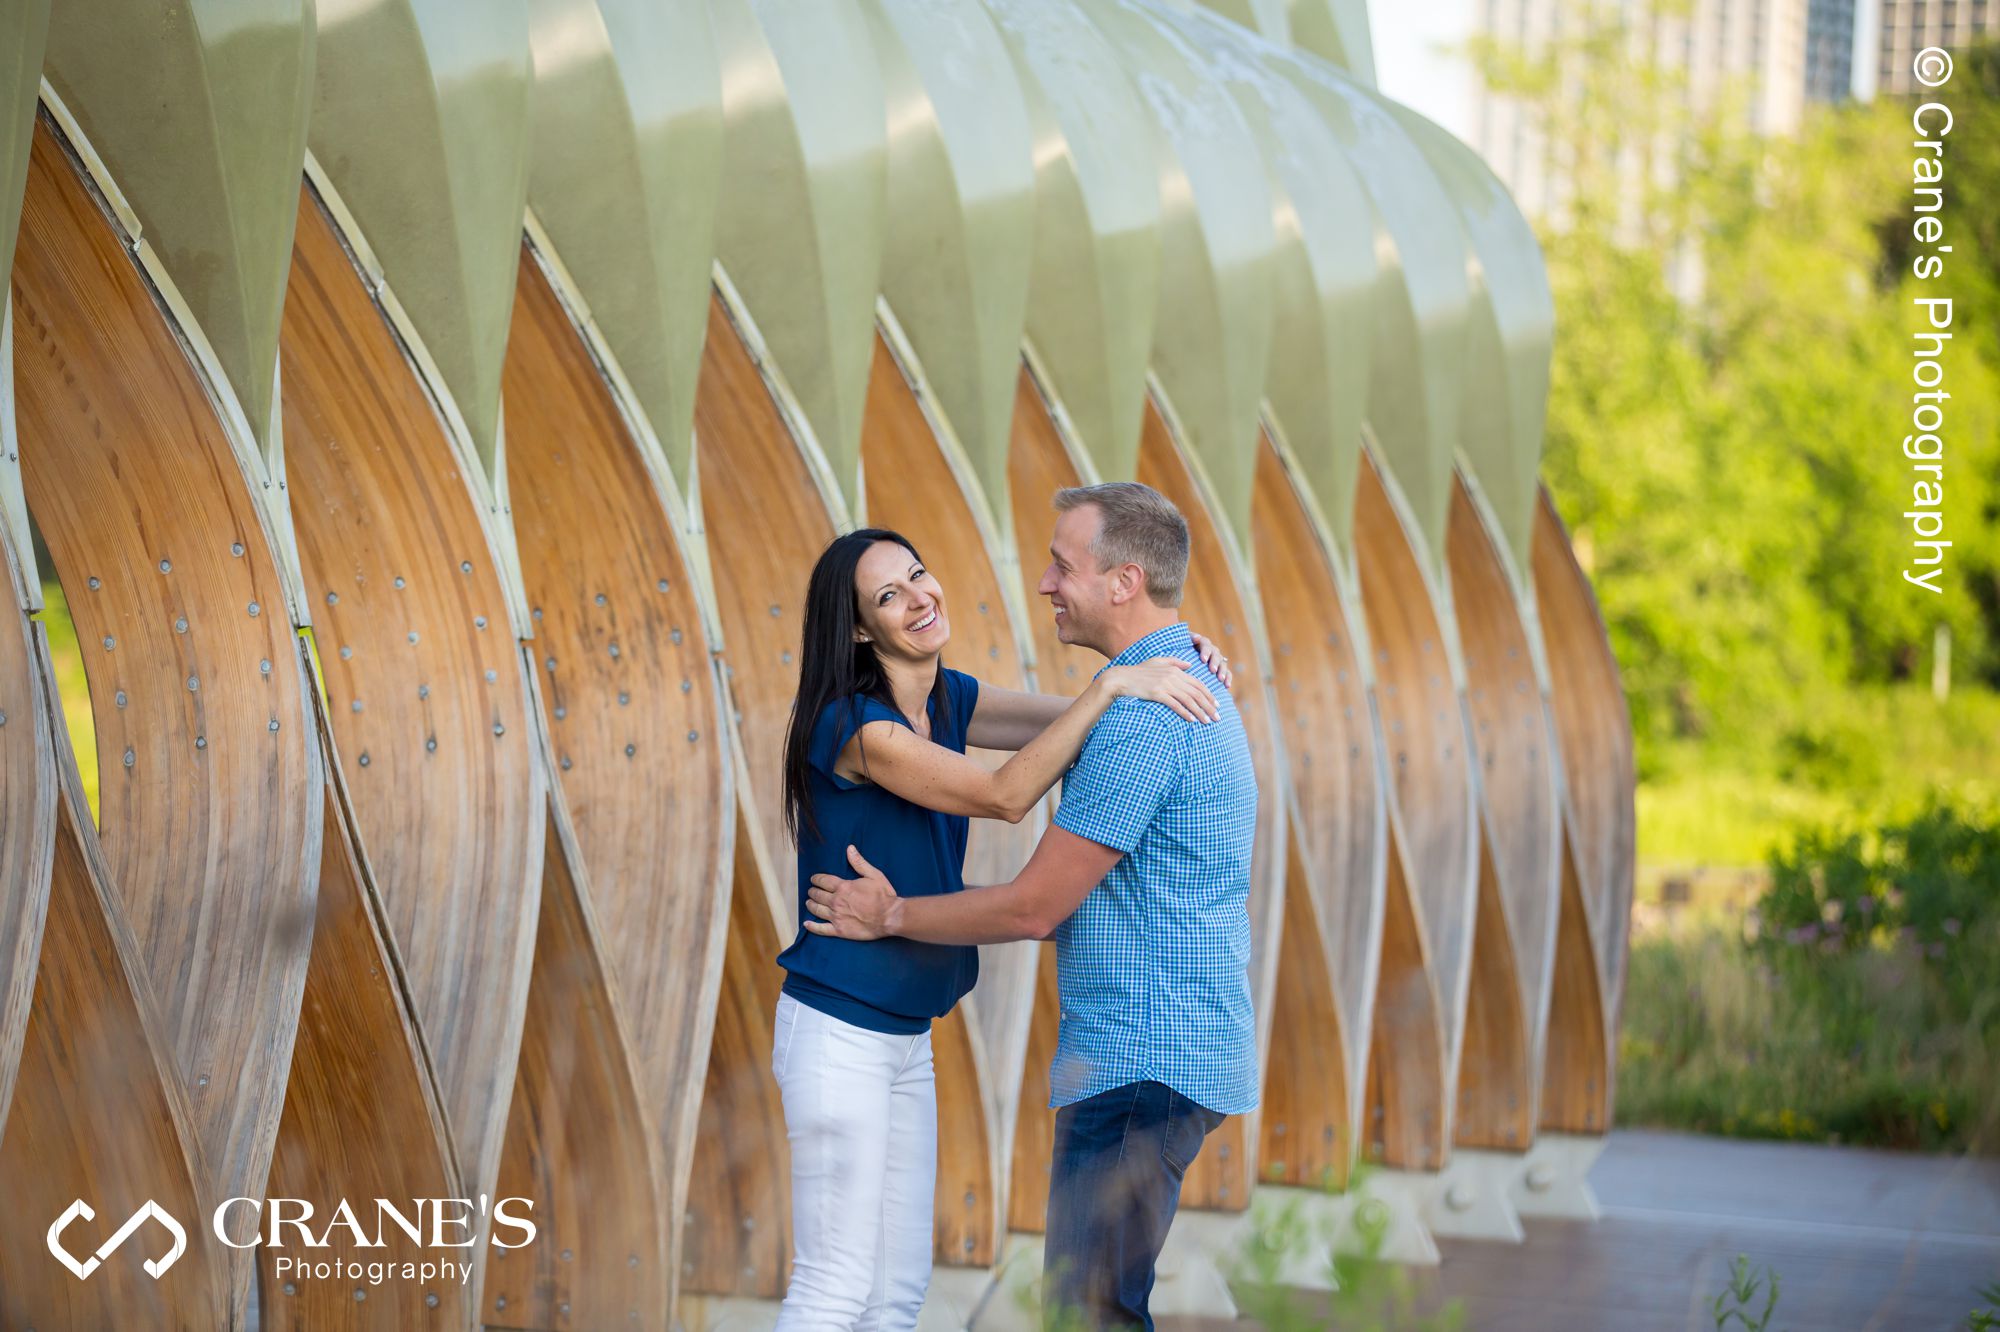 A summer engagement session photo taken at the honeycomb in Chicago